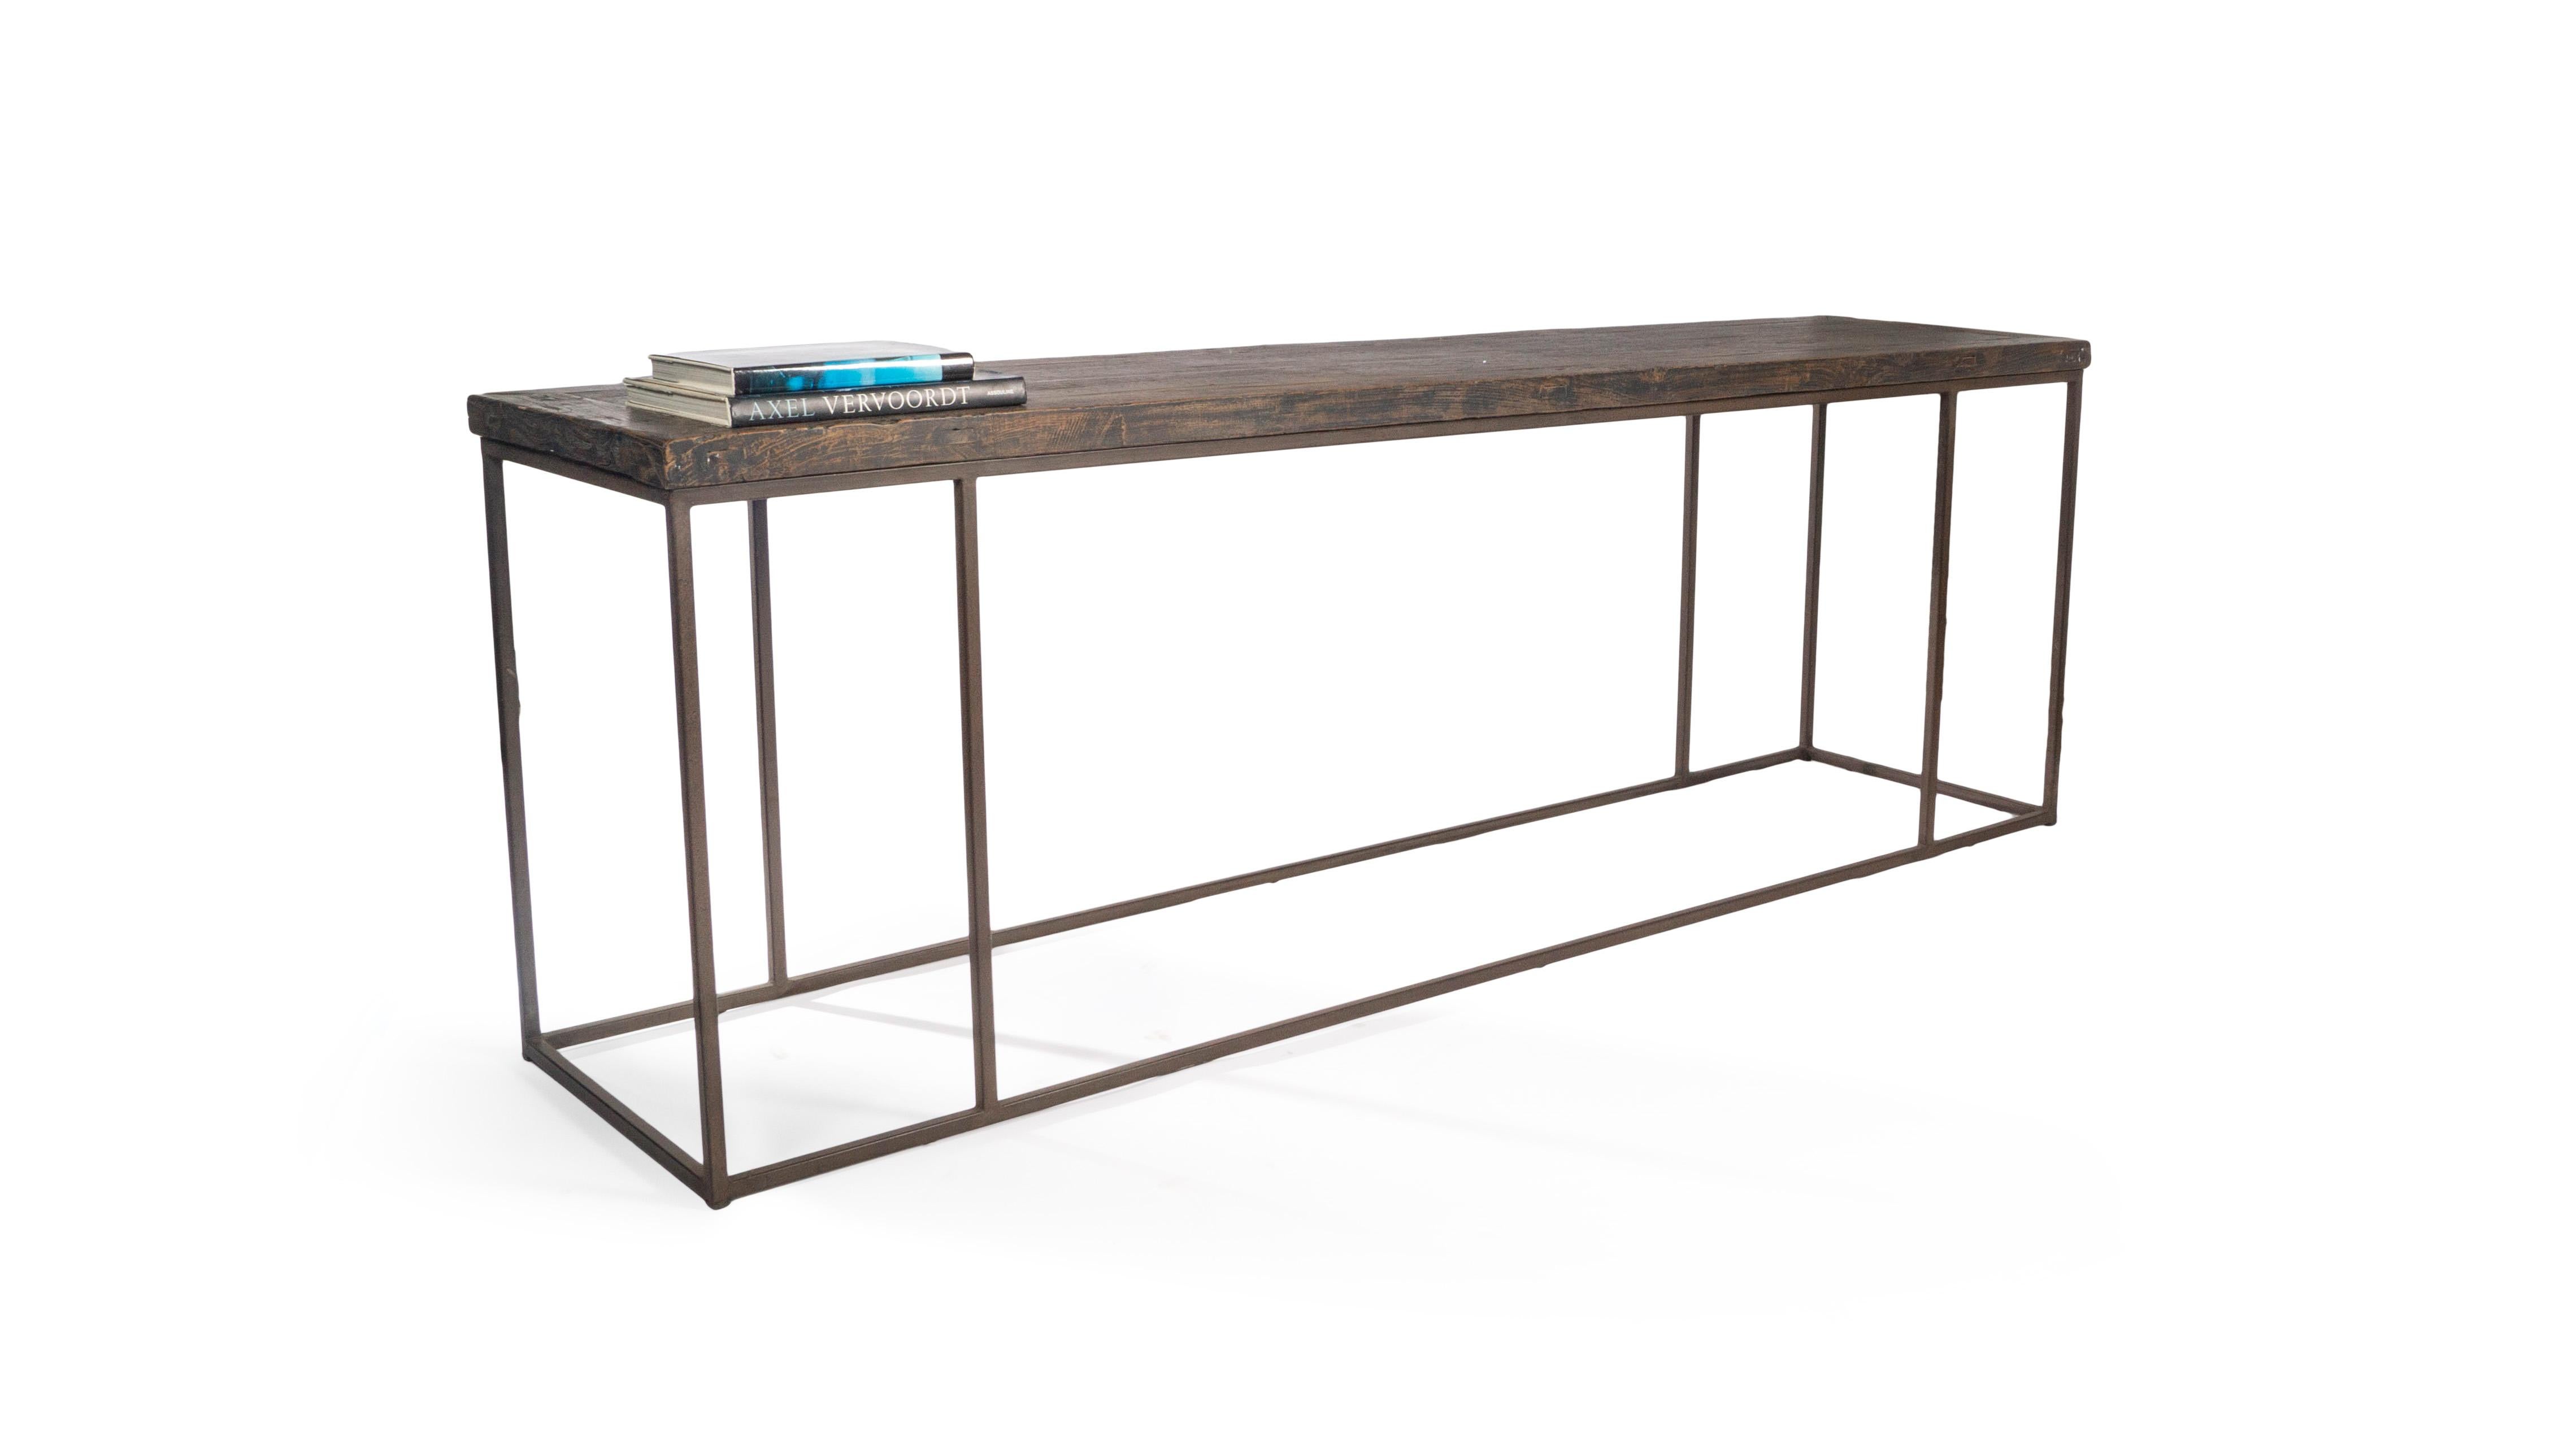 This large console featured a modern steel base and wide reclaimed elm top. This top features a charcoal toned finish that reveals the natural undertones of the wood.

This piece is a part of Brendan Bass’s one-of-a-kind collection, Le Monde.